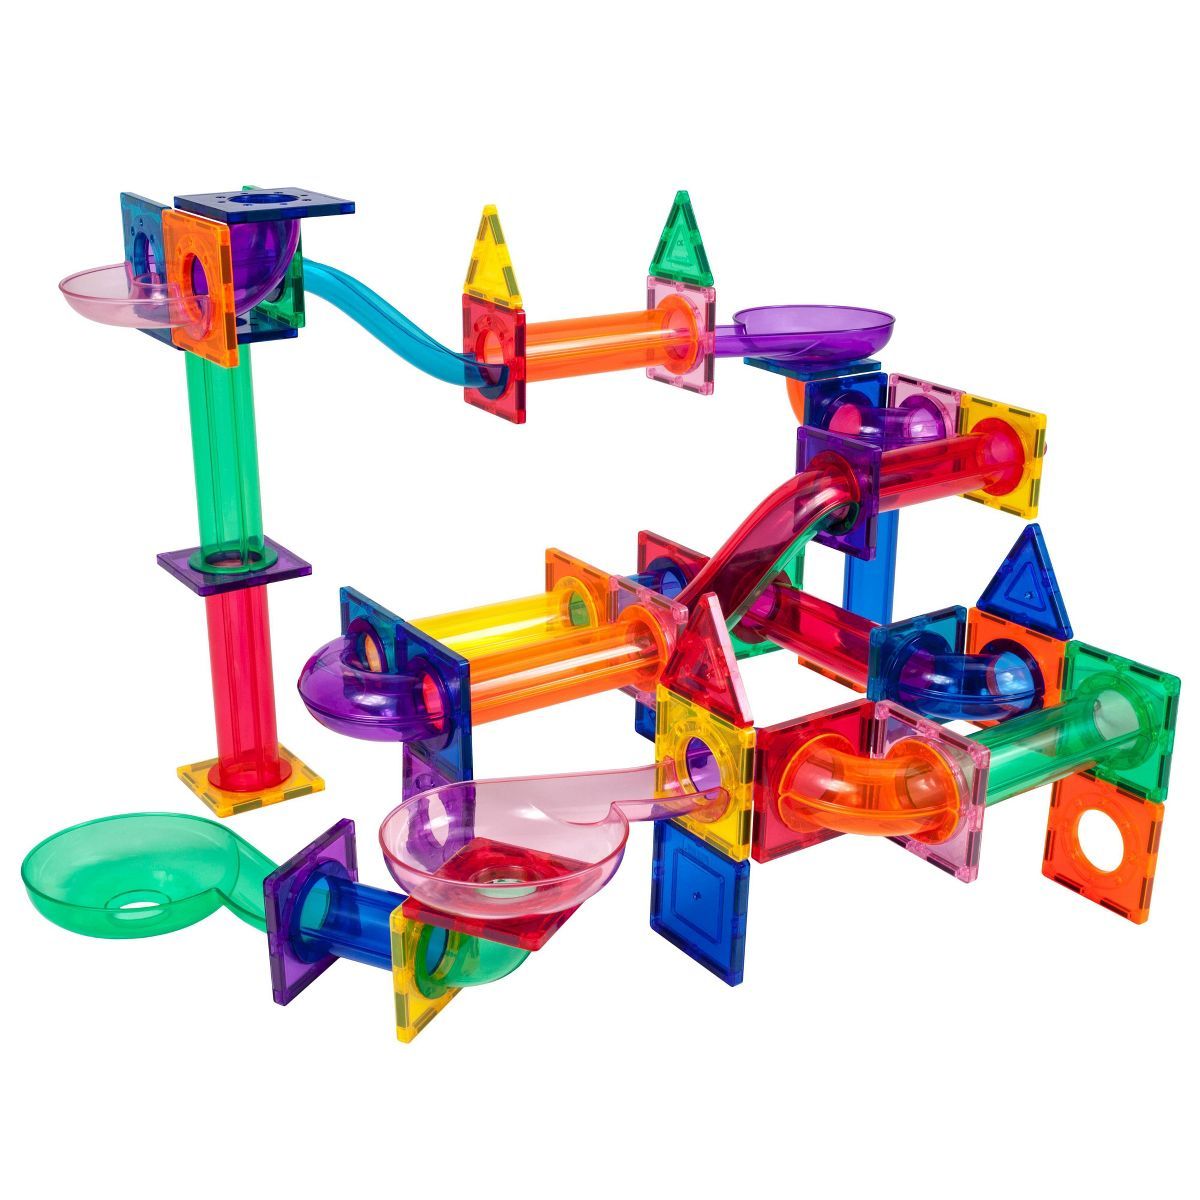 Picasso Tiles Magnetic Marble Run 100pc Building Set | Target